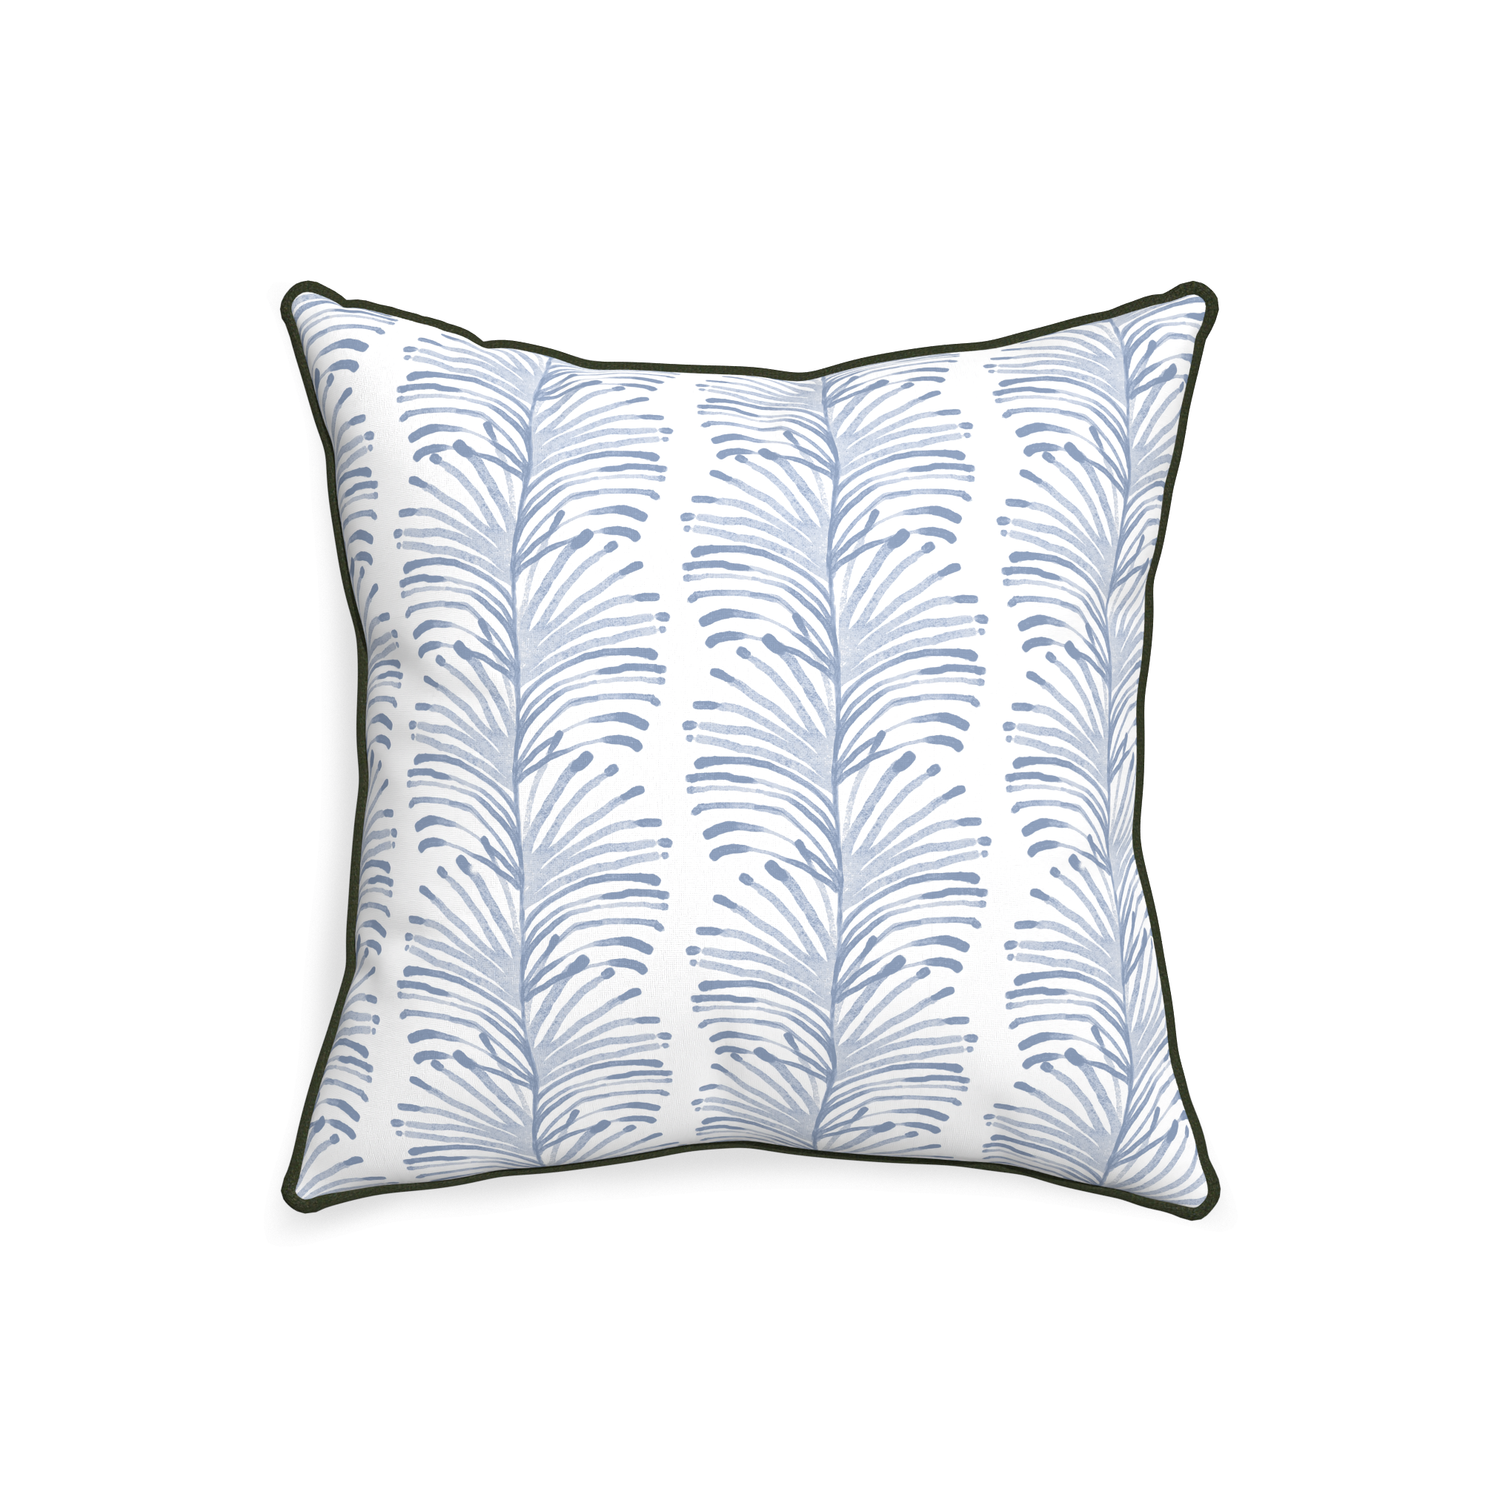 20-square emma sky custom sky blue botanical stripepillow with f piping on white background